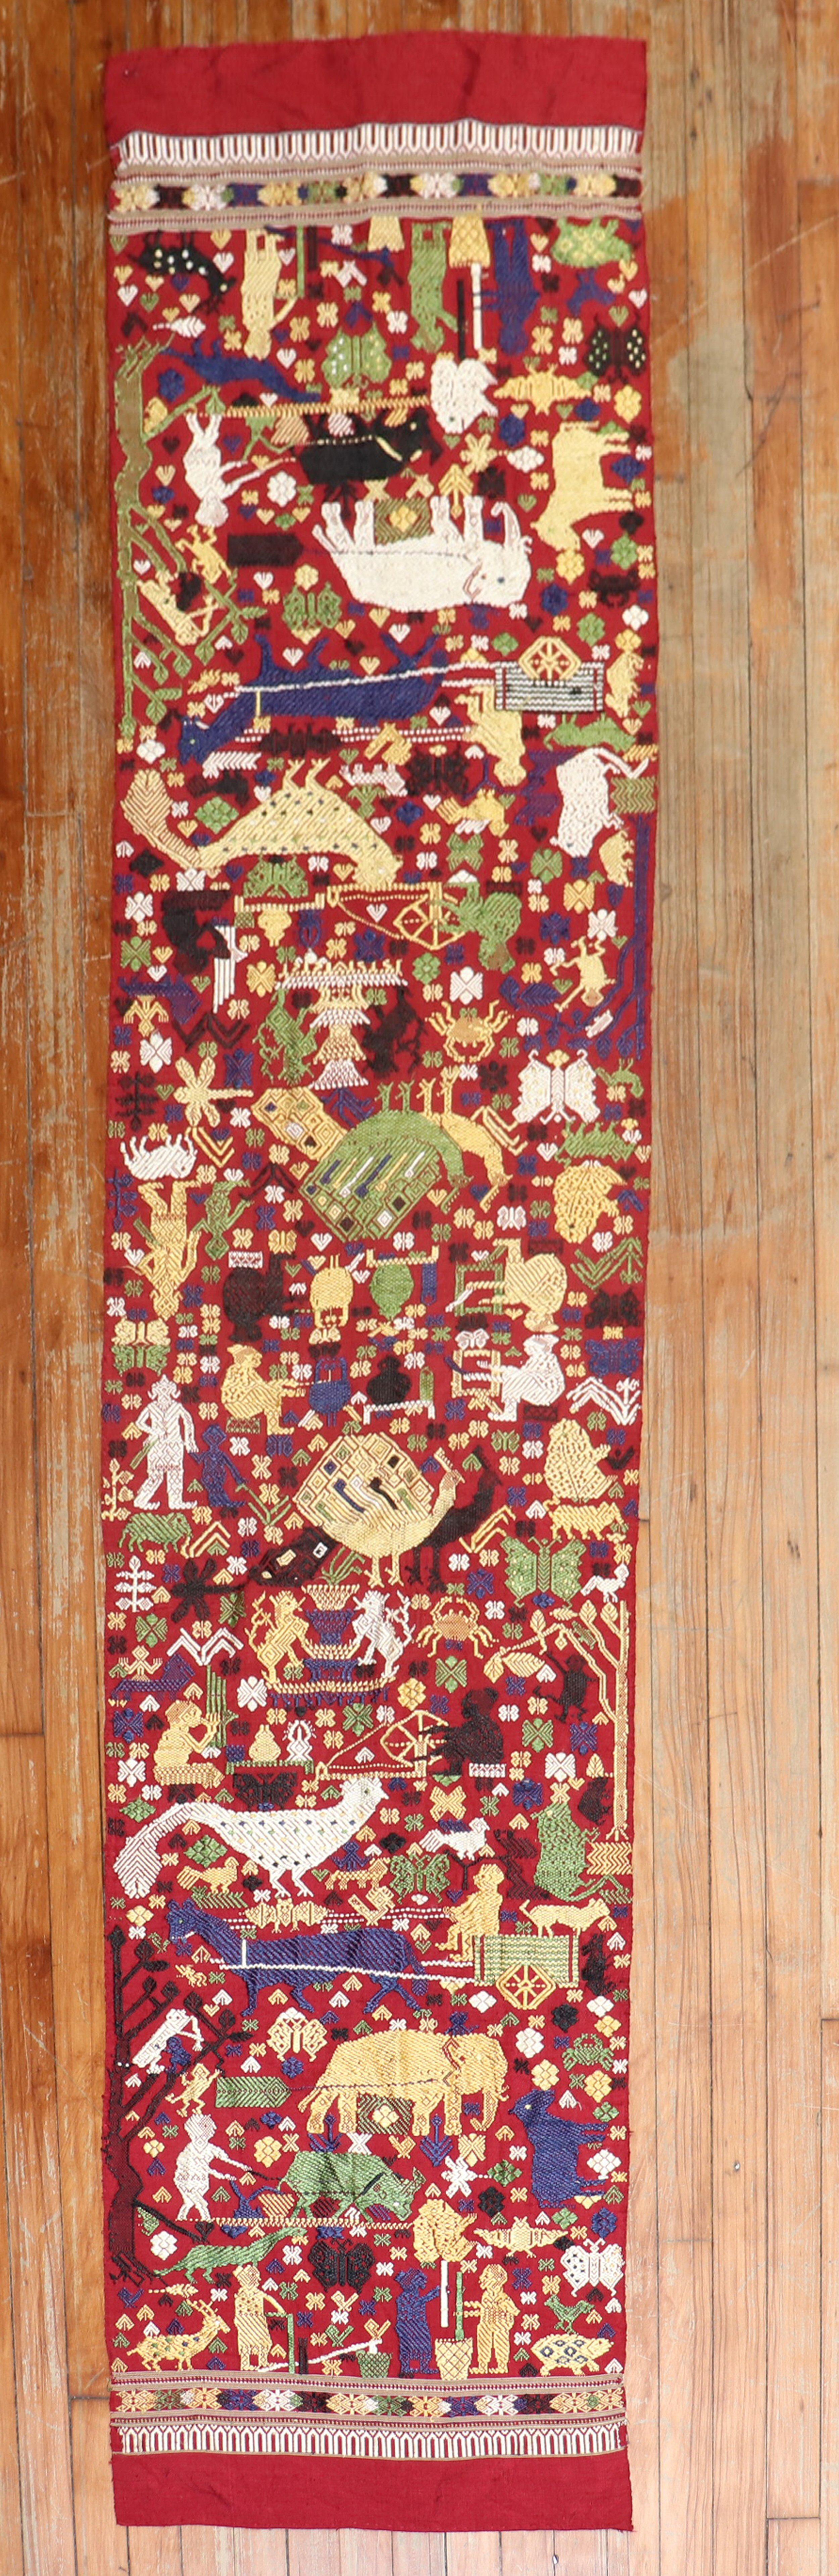 Late 20th Century Egypian Textile Embroidery with a pictorial design

Measures: 1'10'' x 7'10''.